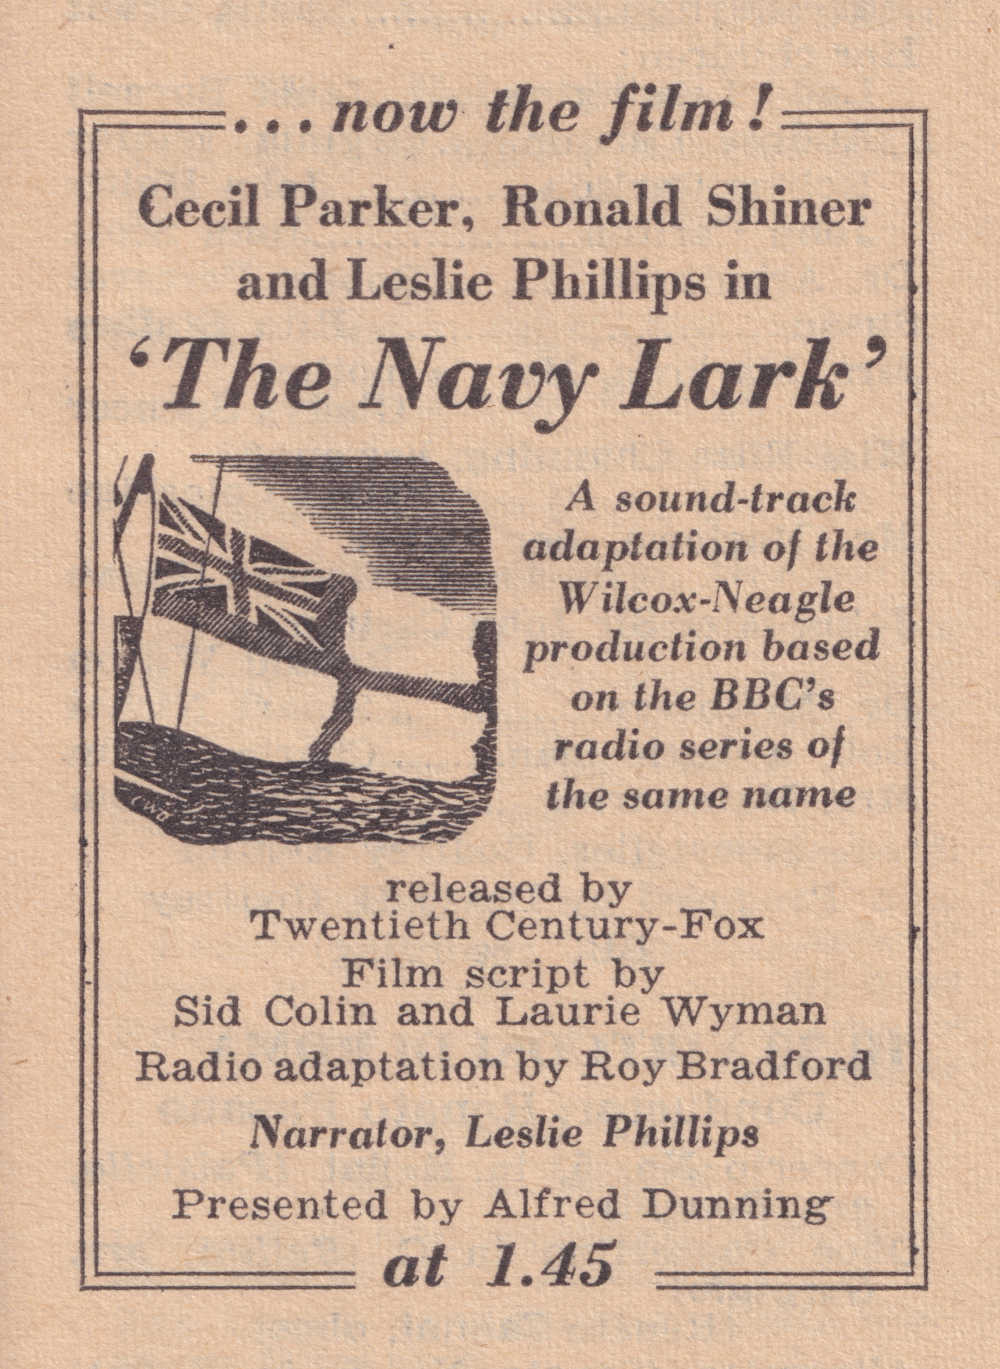 Box-out for the Navy Lark Film sound-track adaptation